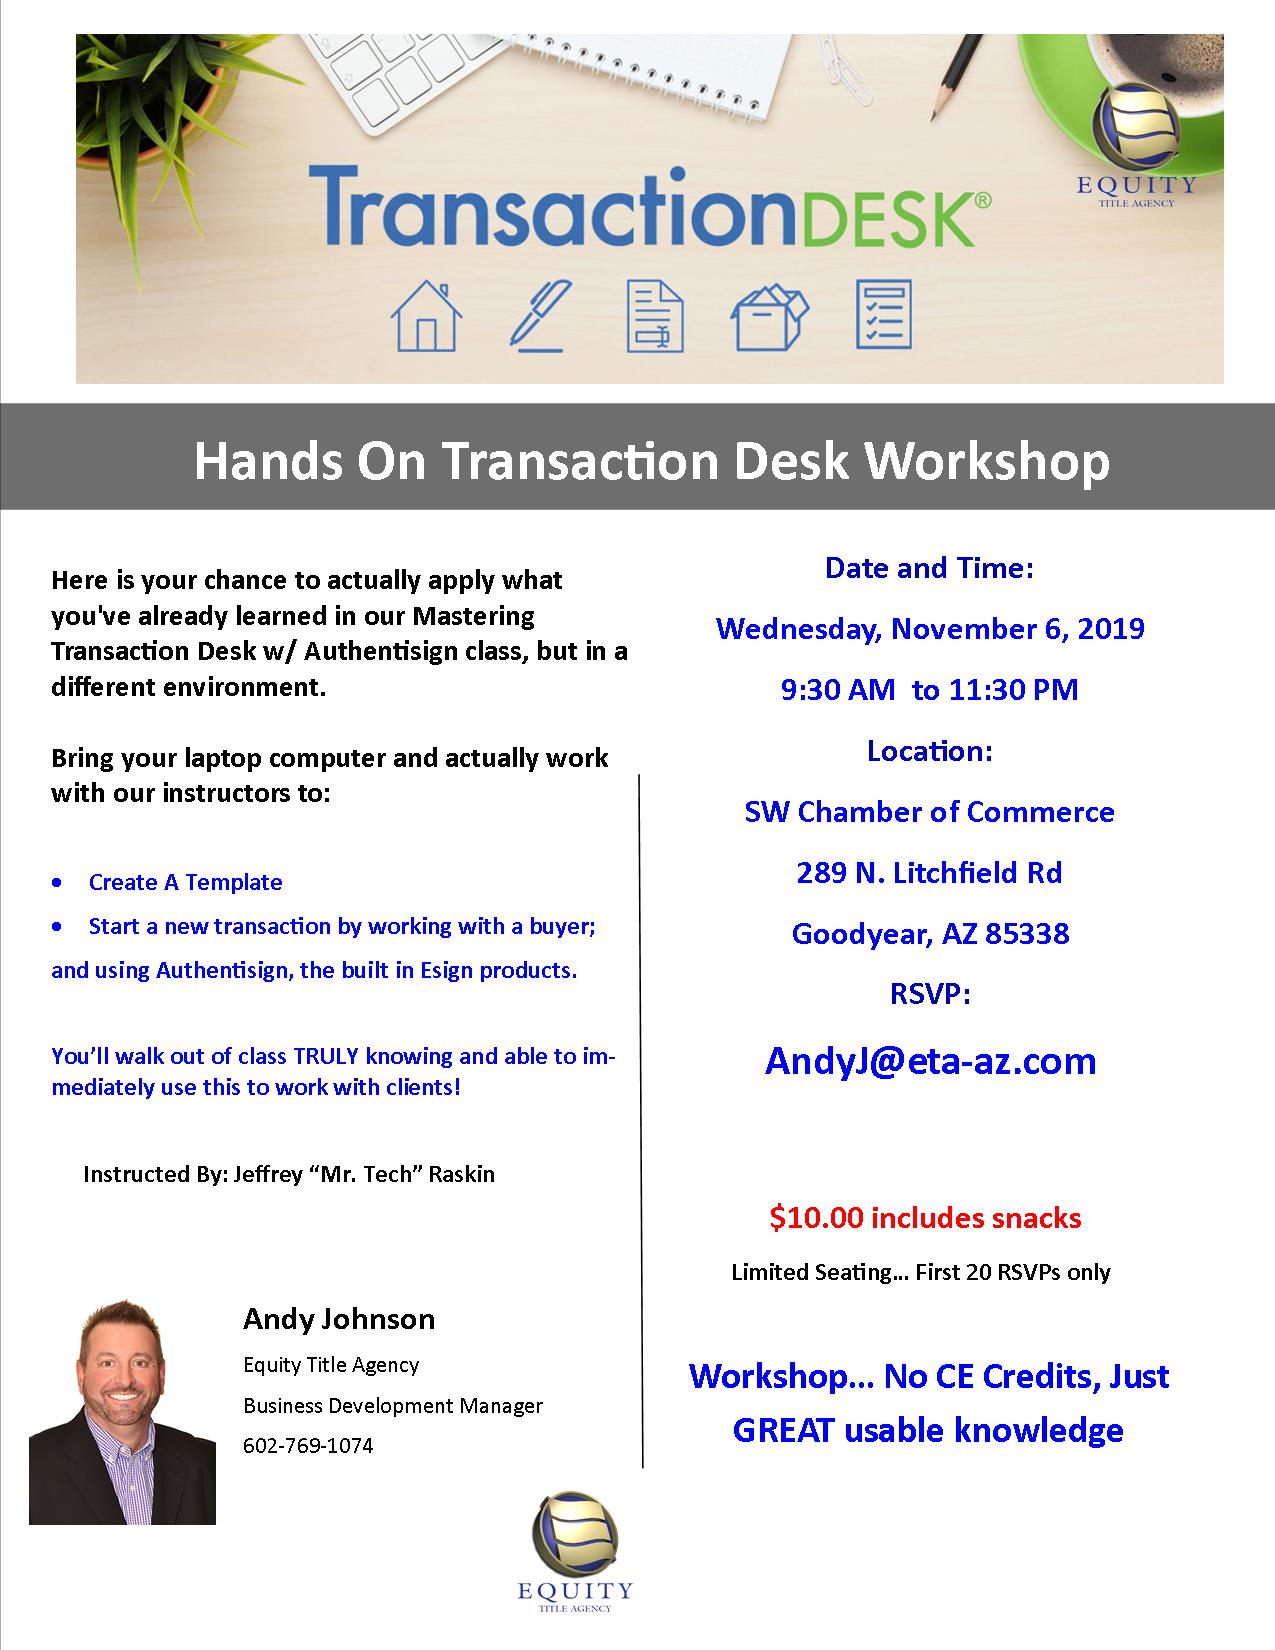 Nov 6 Hands on Transaction Andy